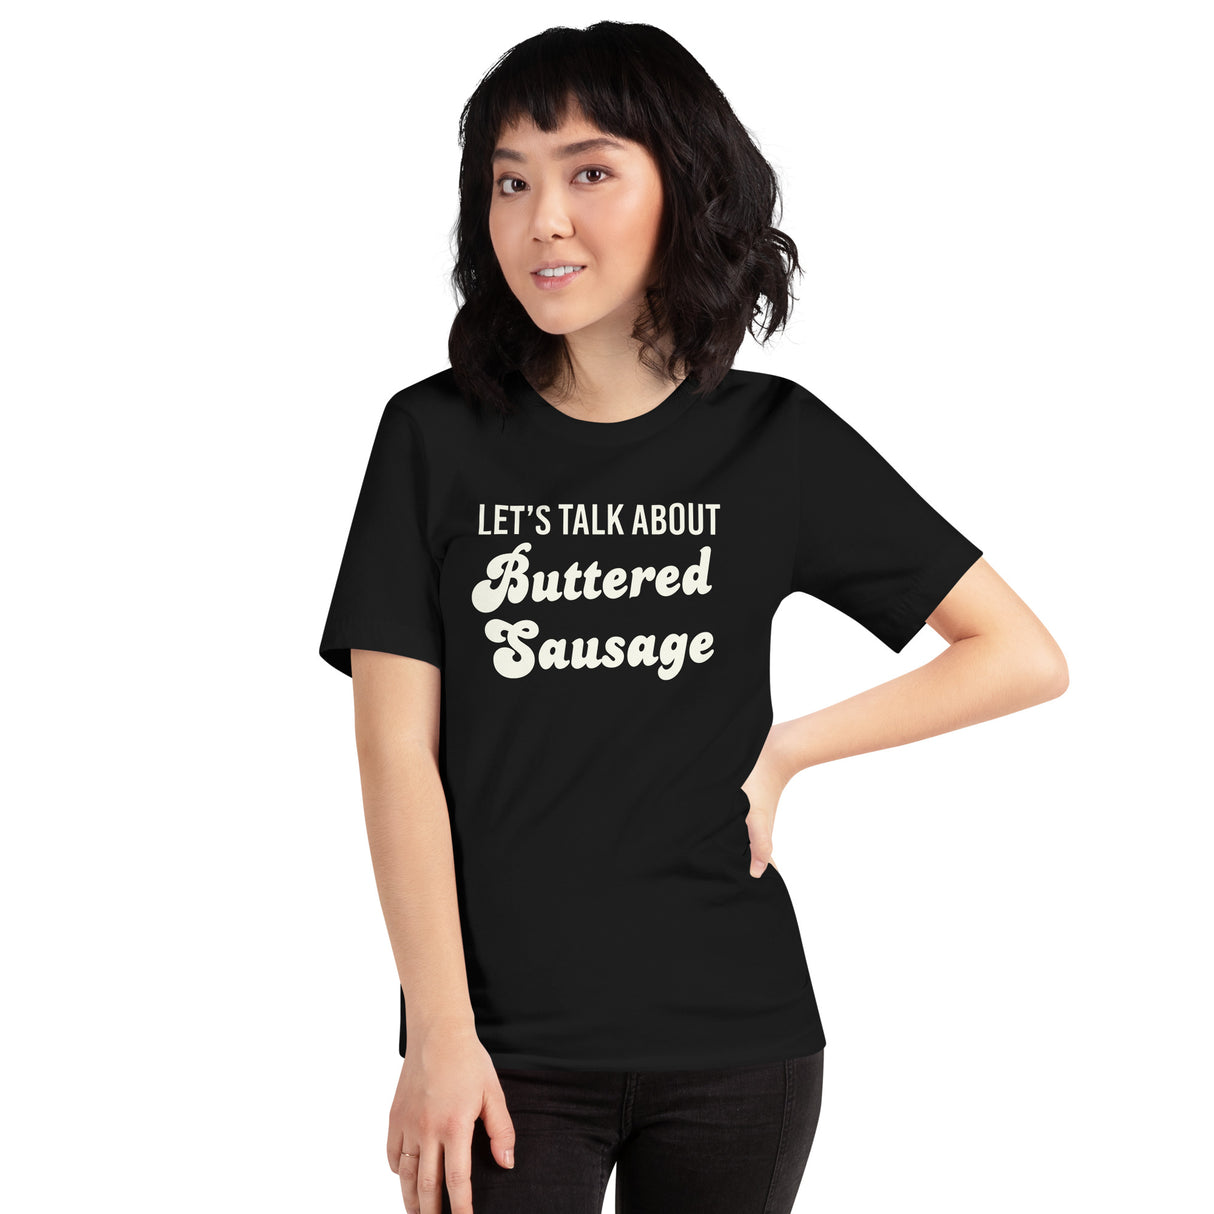 Let's Talk About Buttered Sausage Women's Shirt